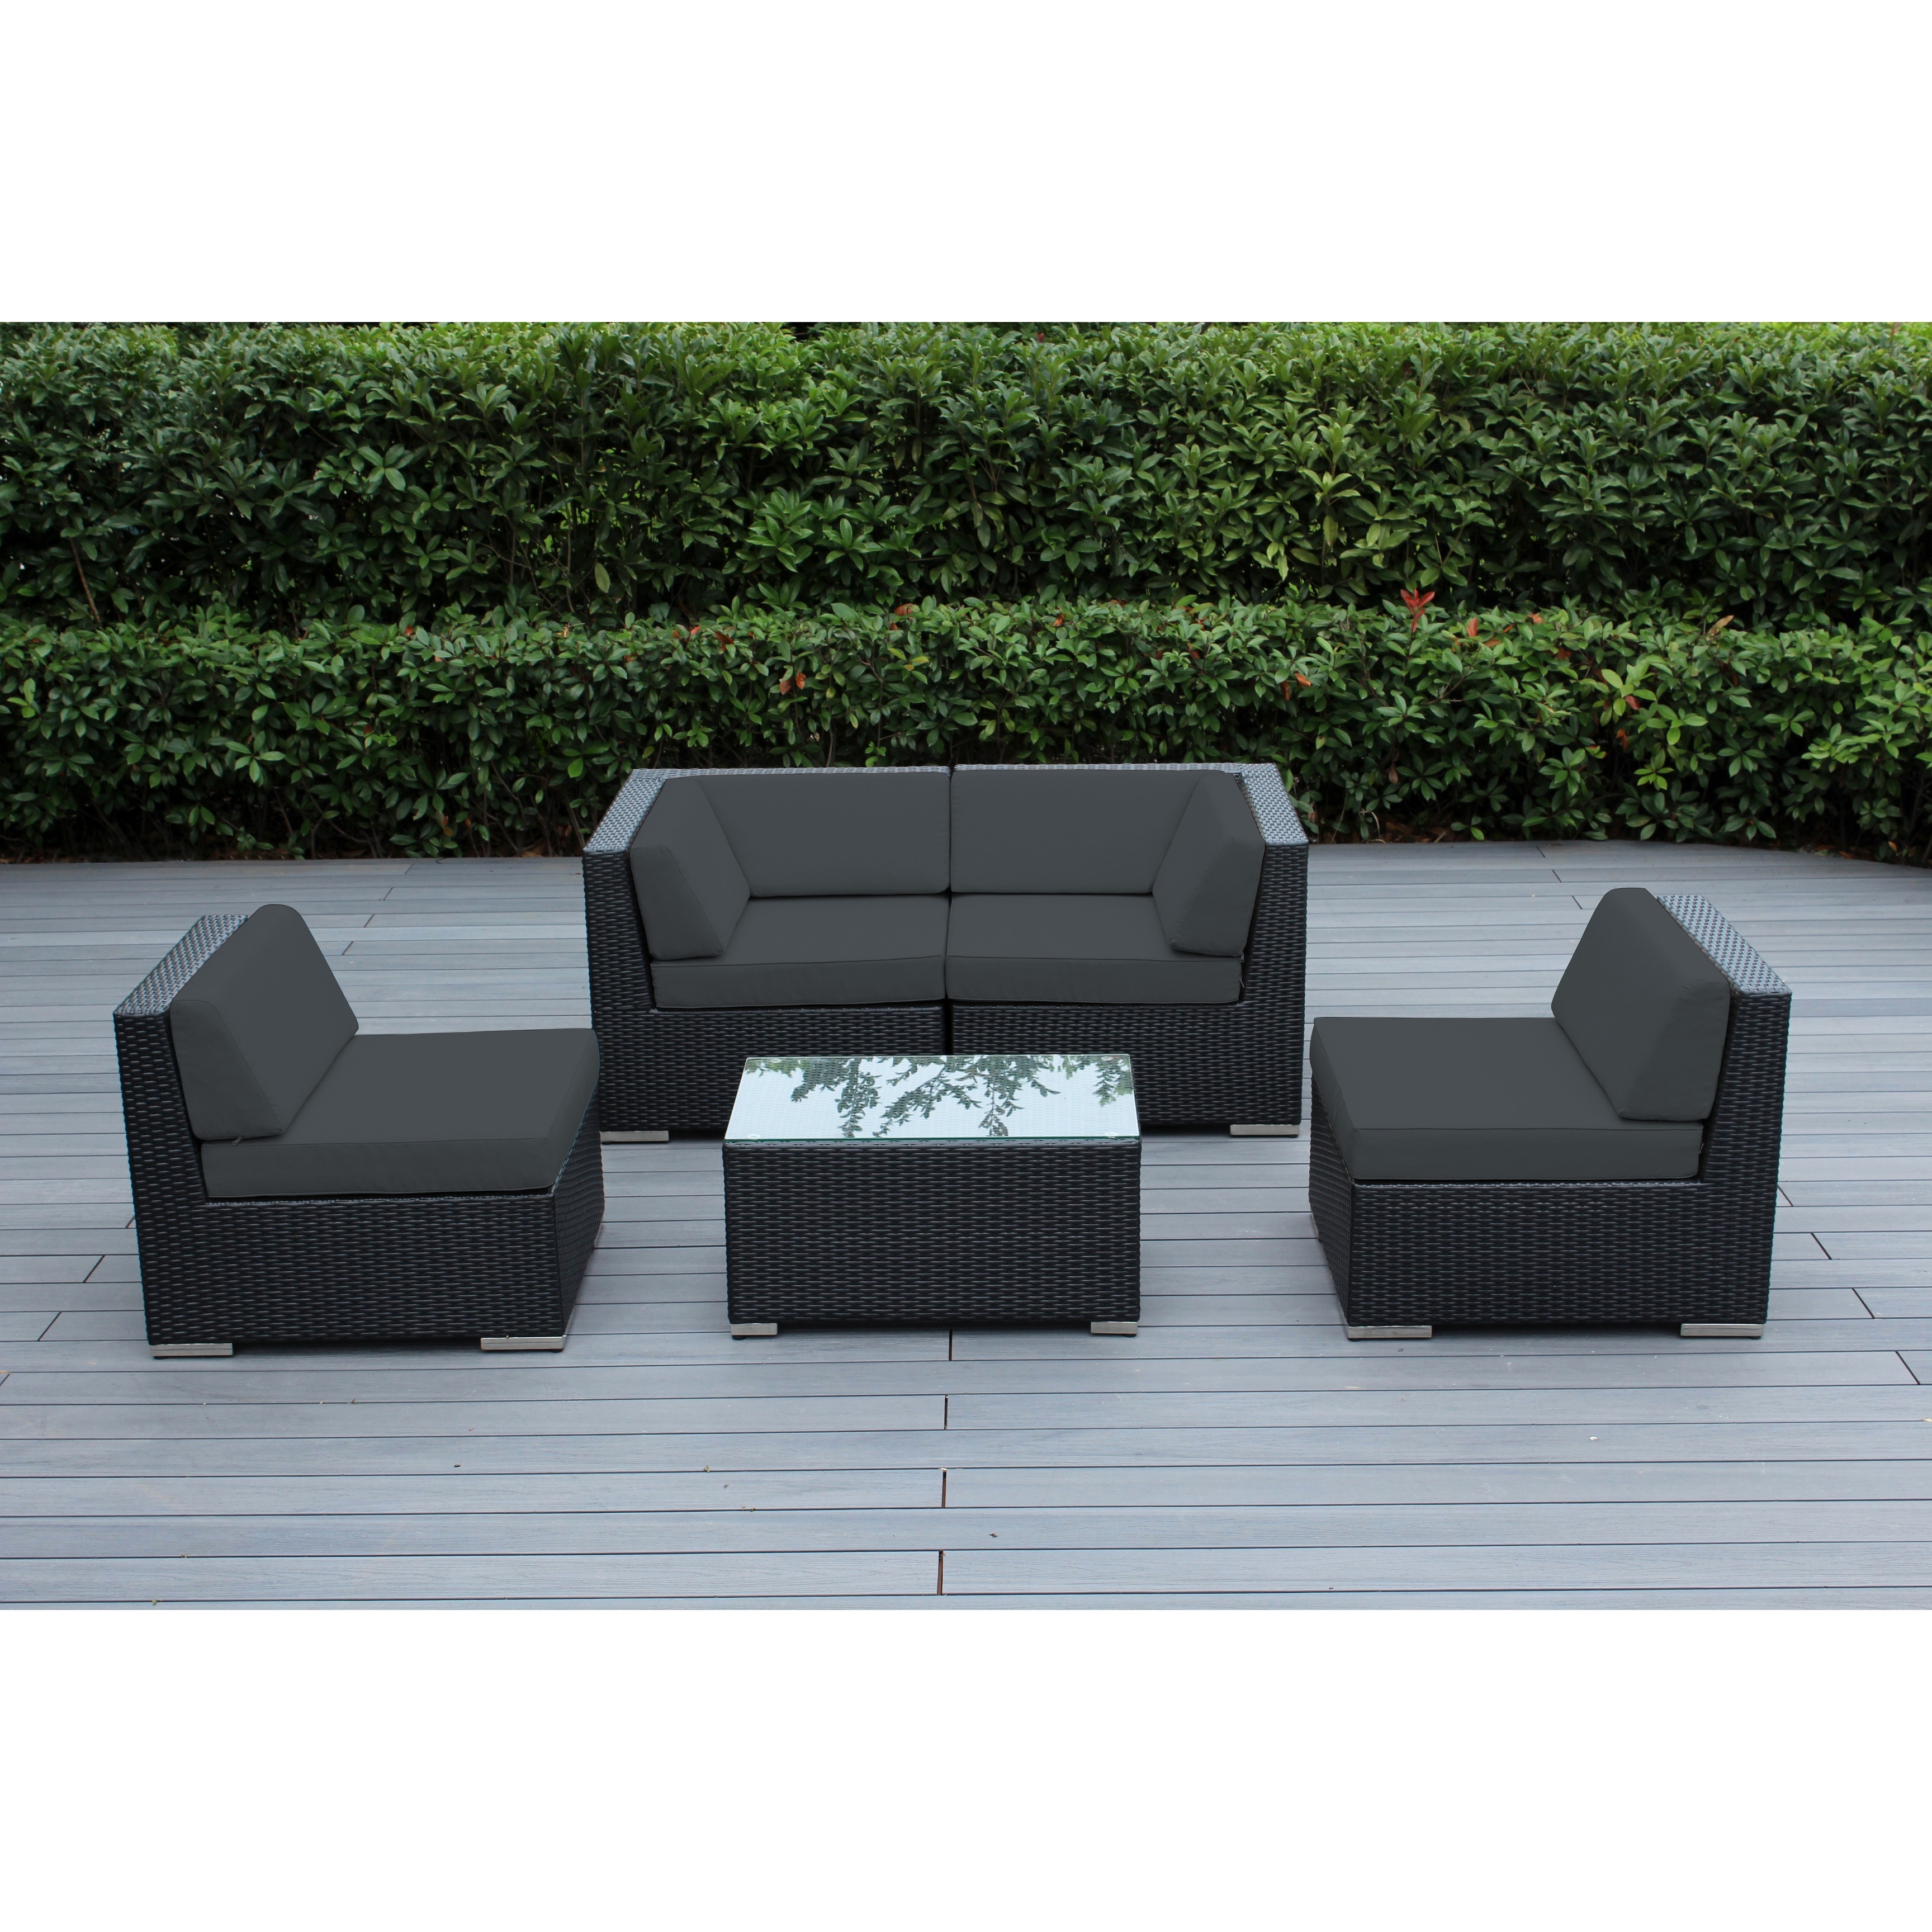 Ohana Outdoor Patio 5 Piece Black Wicker Sectional With Cushions - No Assembly